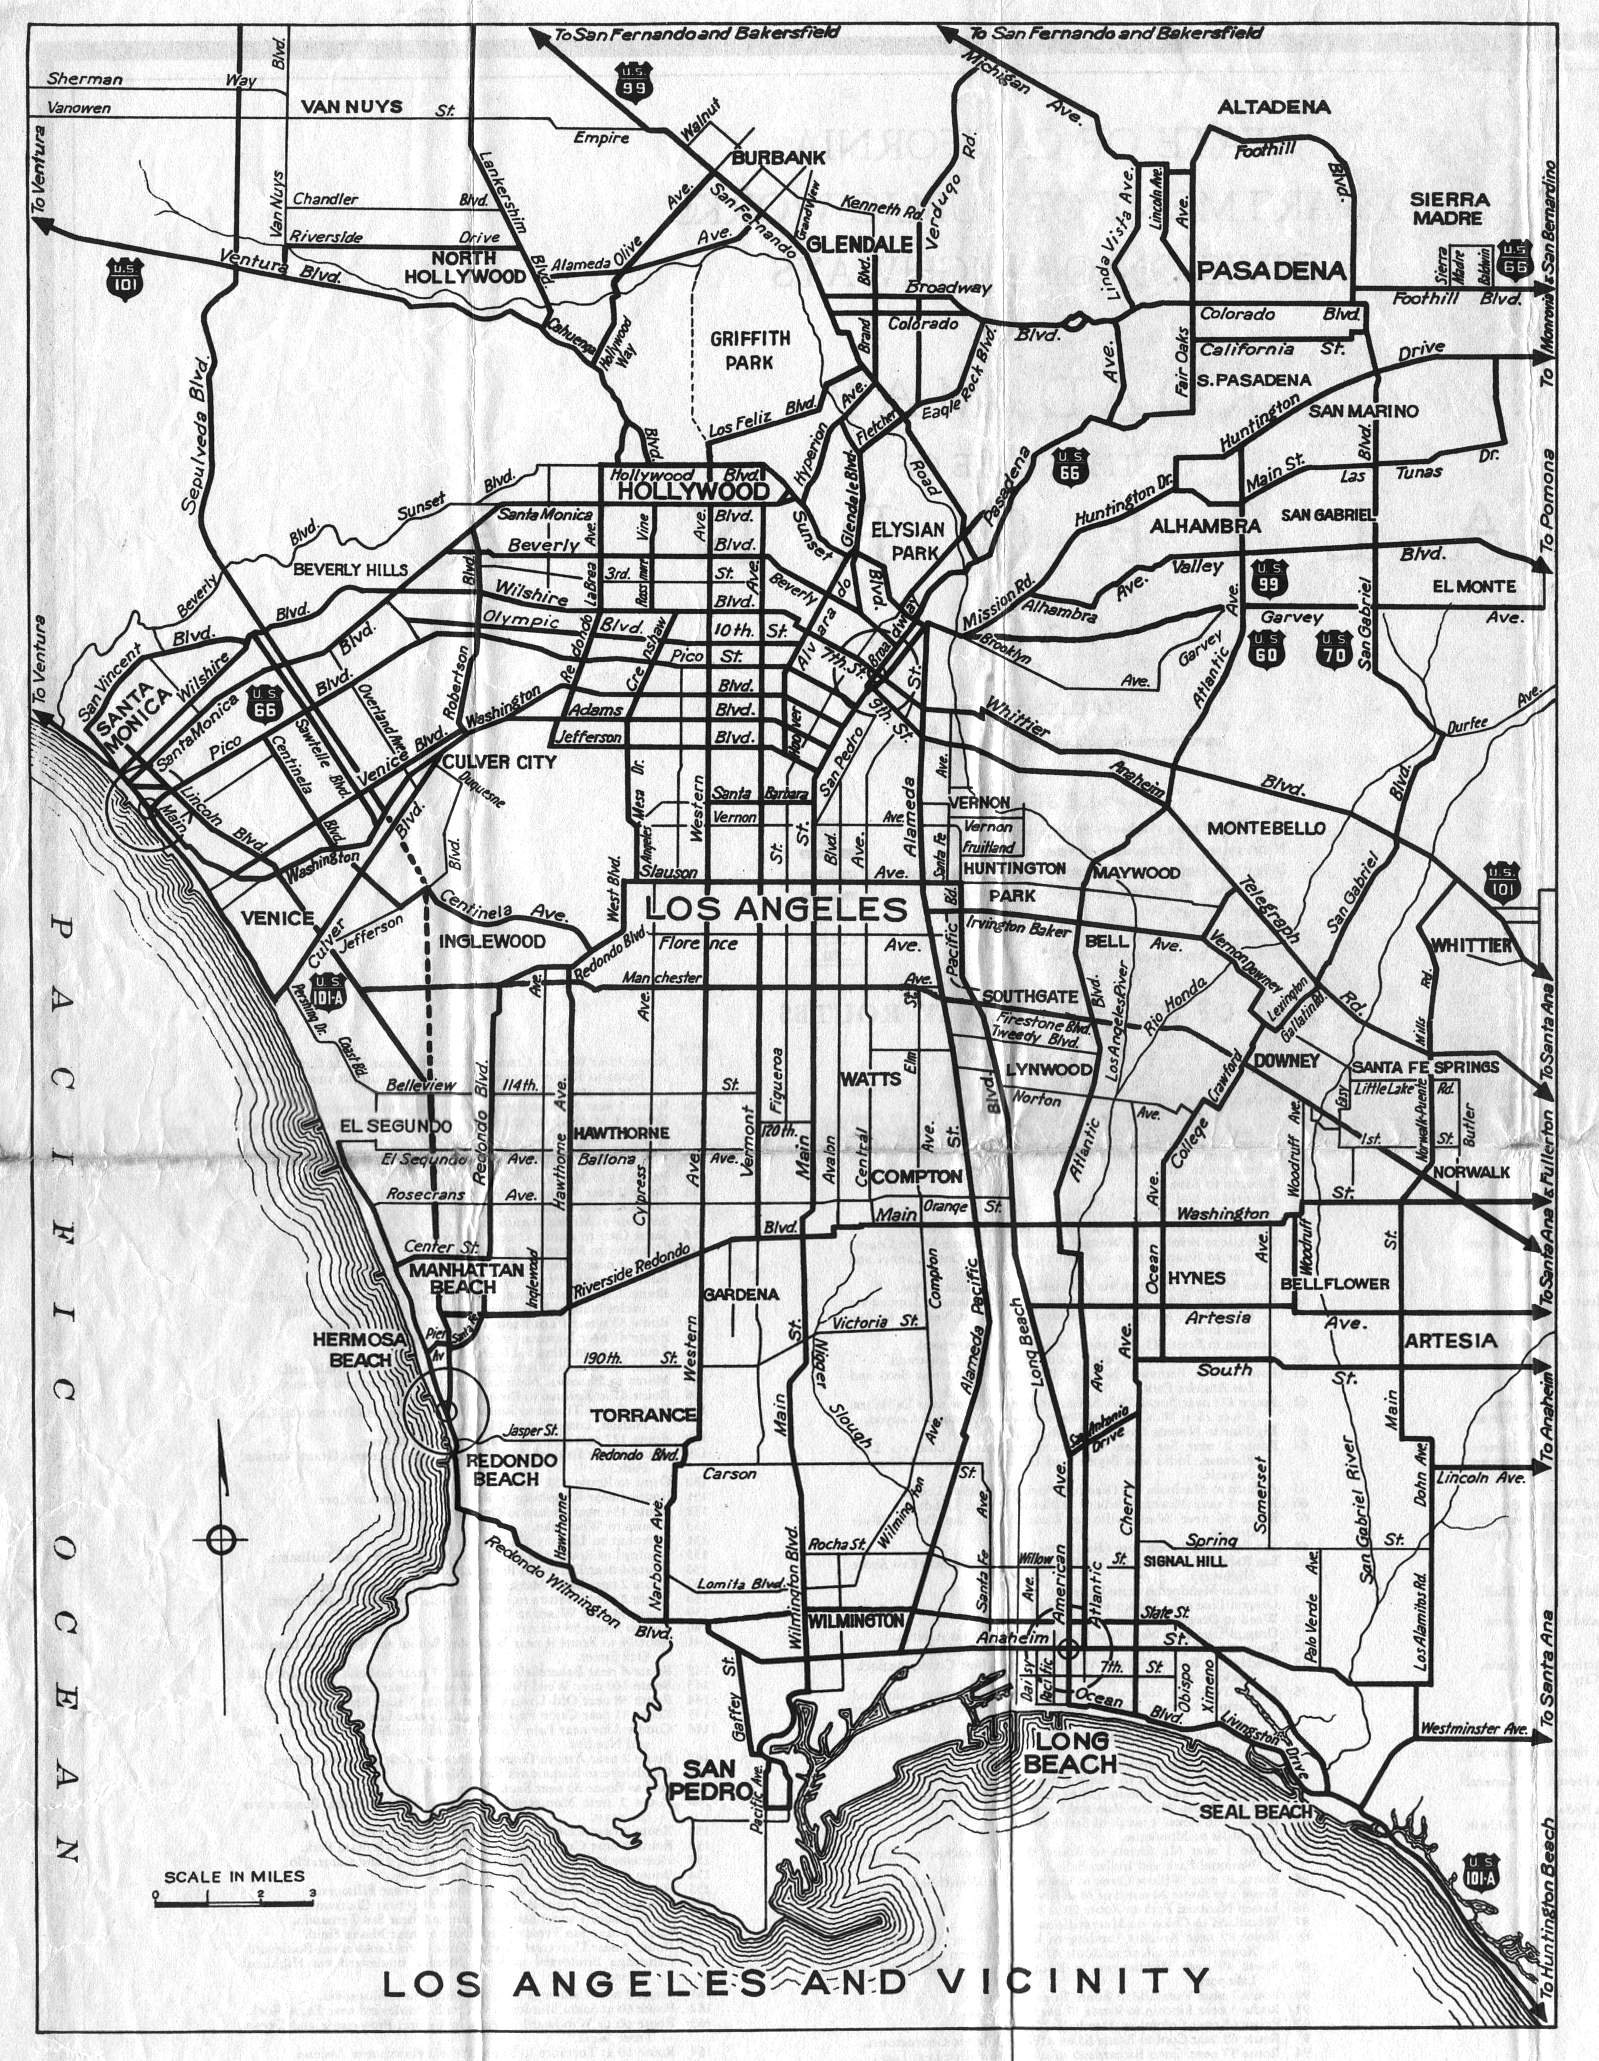 Detail map for Los Angeles and vicinity on the 1936 California official highway map